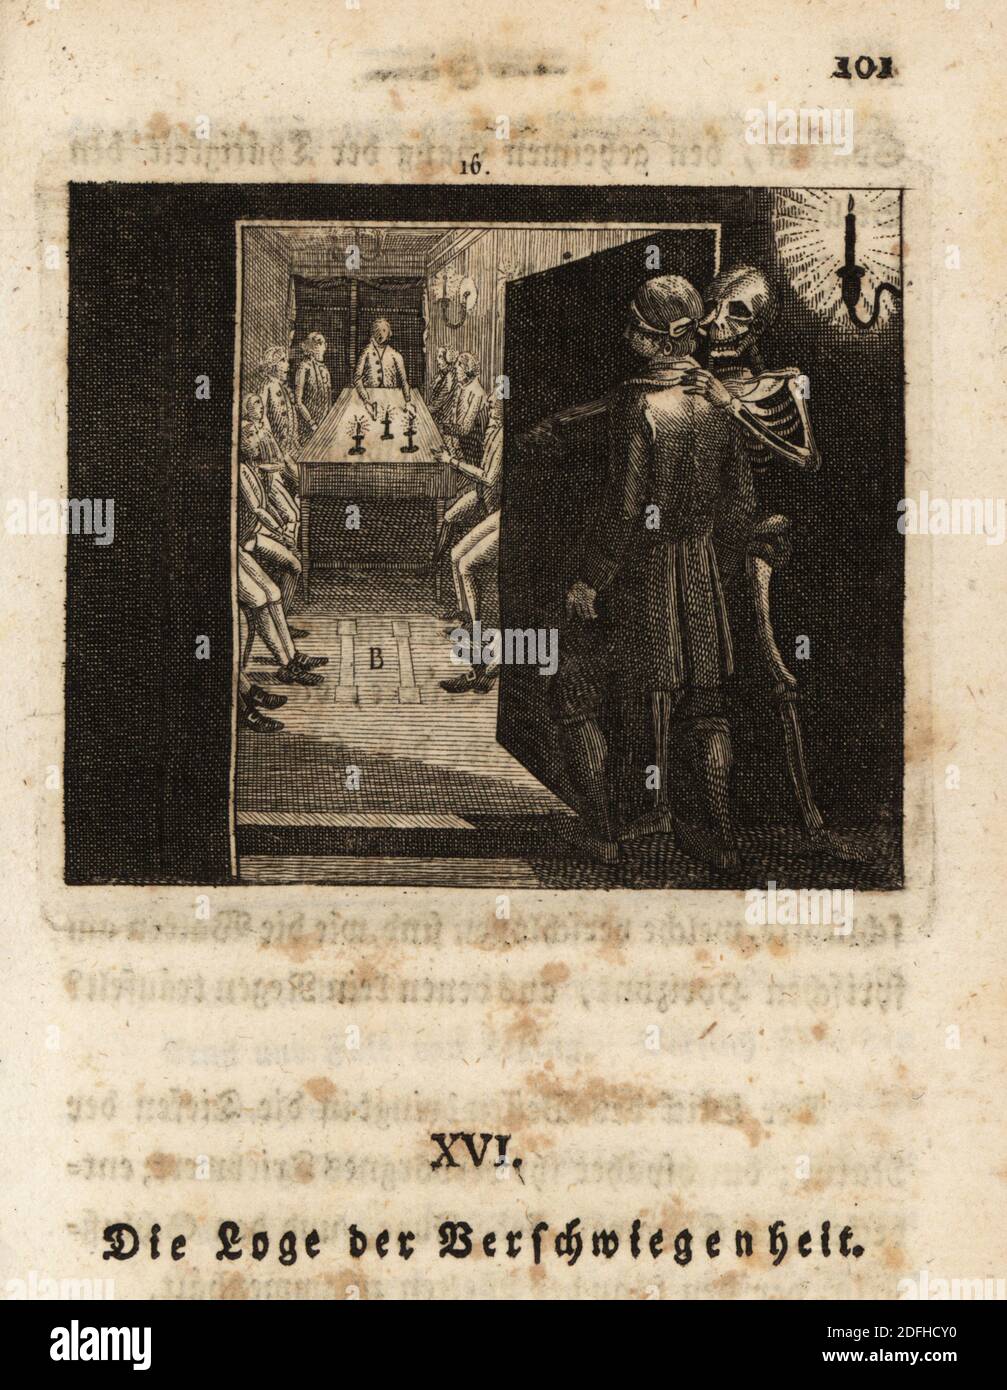 The skeleton of Death, Freund Hans, guides an initiate to a ceremony at a Masonic Lodge, 18th century. The initiate is blindfolded and enters a room with many men sitting around a table with candles. The Masonic lodge. Die Loge der Verschwiegenheit. Copperplate engraving by Johan Georg Mansfeld after an original by Johann Rudolf Schellenberg from Johan Kark Musaus’s Freund Heins Erscheinungen in Holbeins Manier, (Apparitions of Death in the manner of Holbein) Mannheim, 1803. Stock Photo